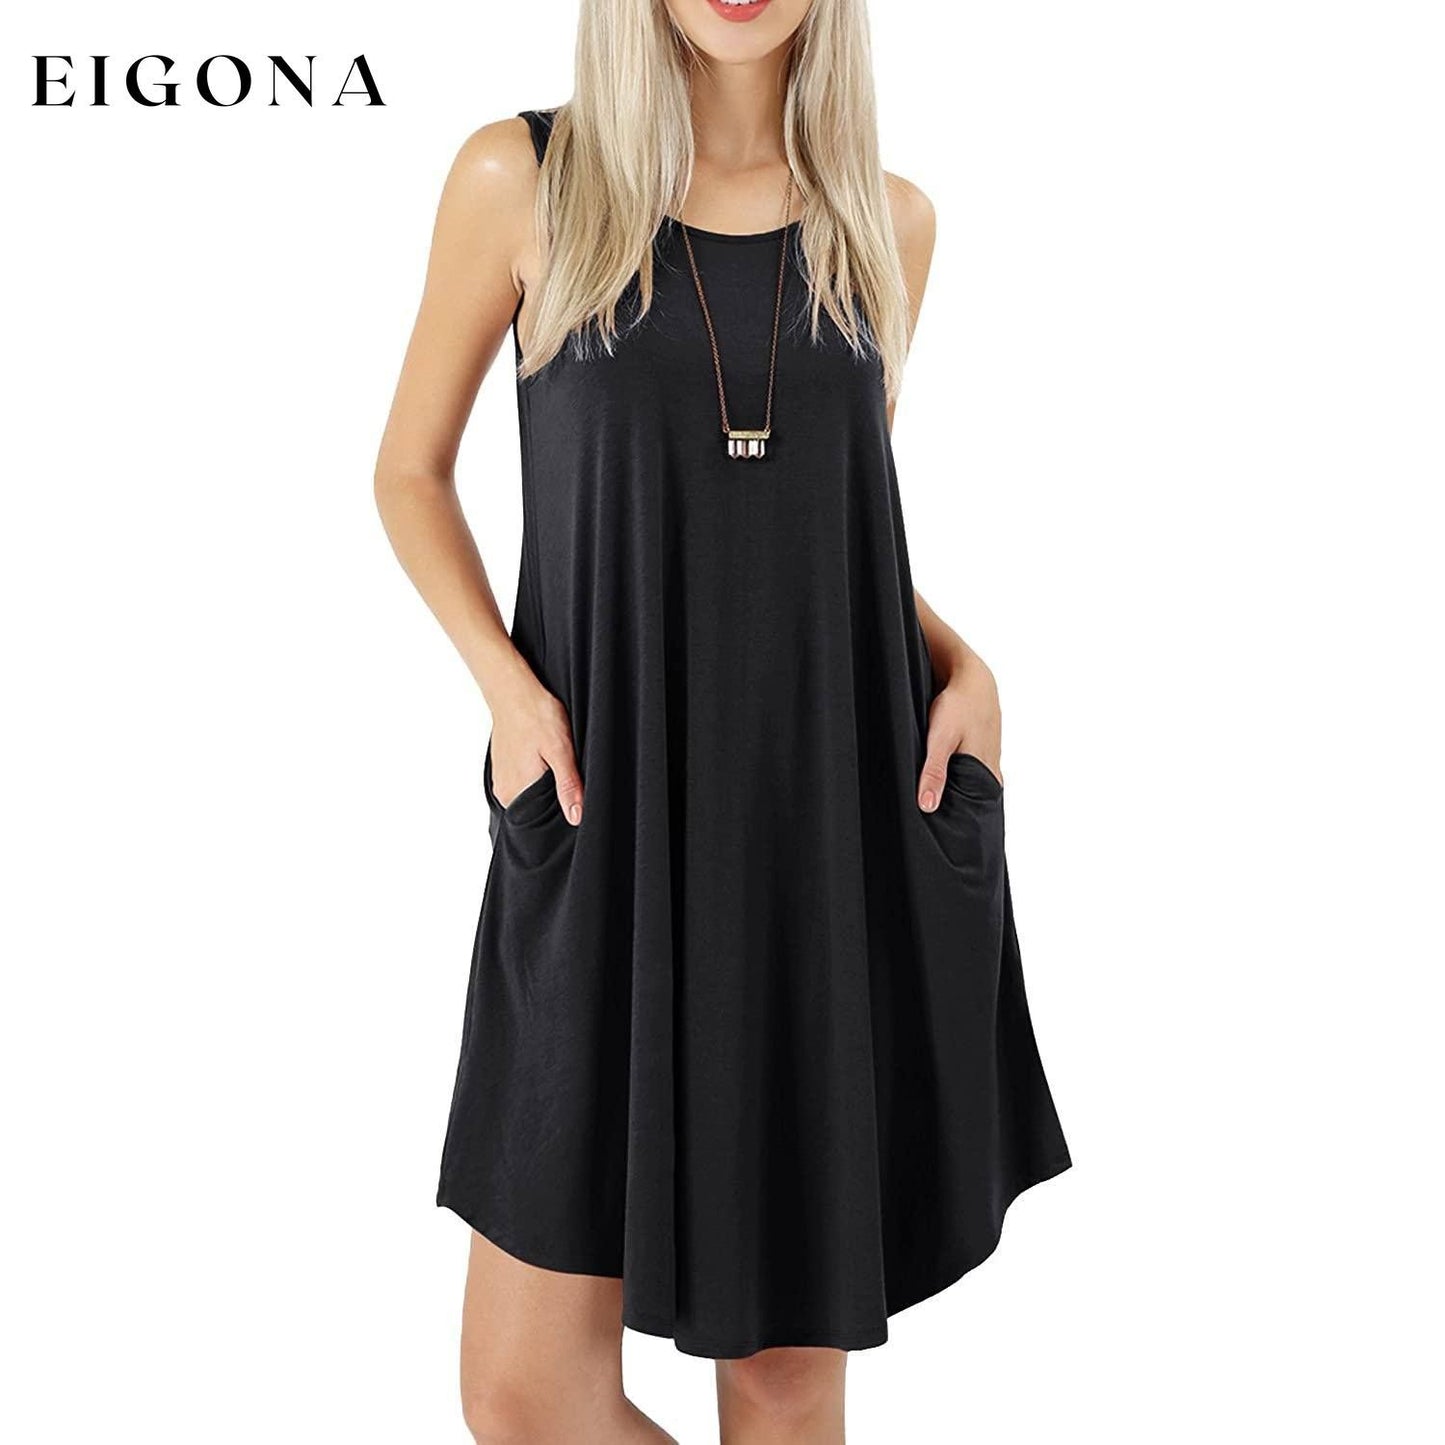 Women's Sleeveless Pockets Casual Swing T-Shirt Short Dresses Black __stock:200 casual dresses clothes dresses refund_fee:800